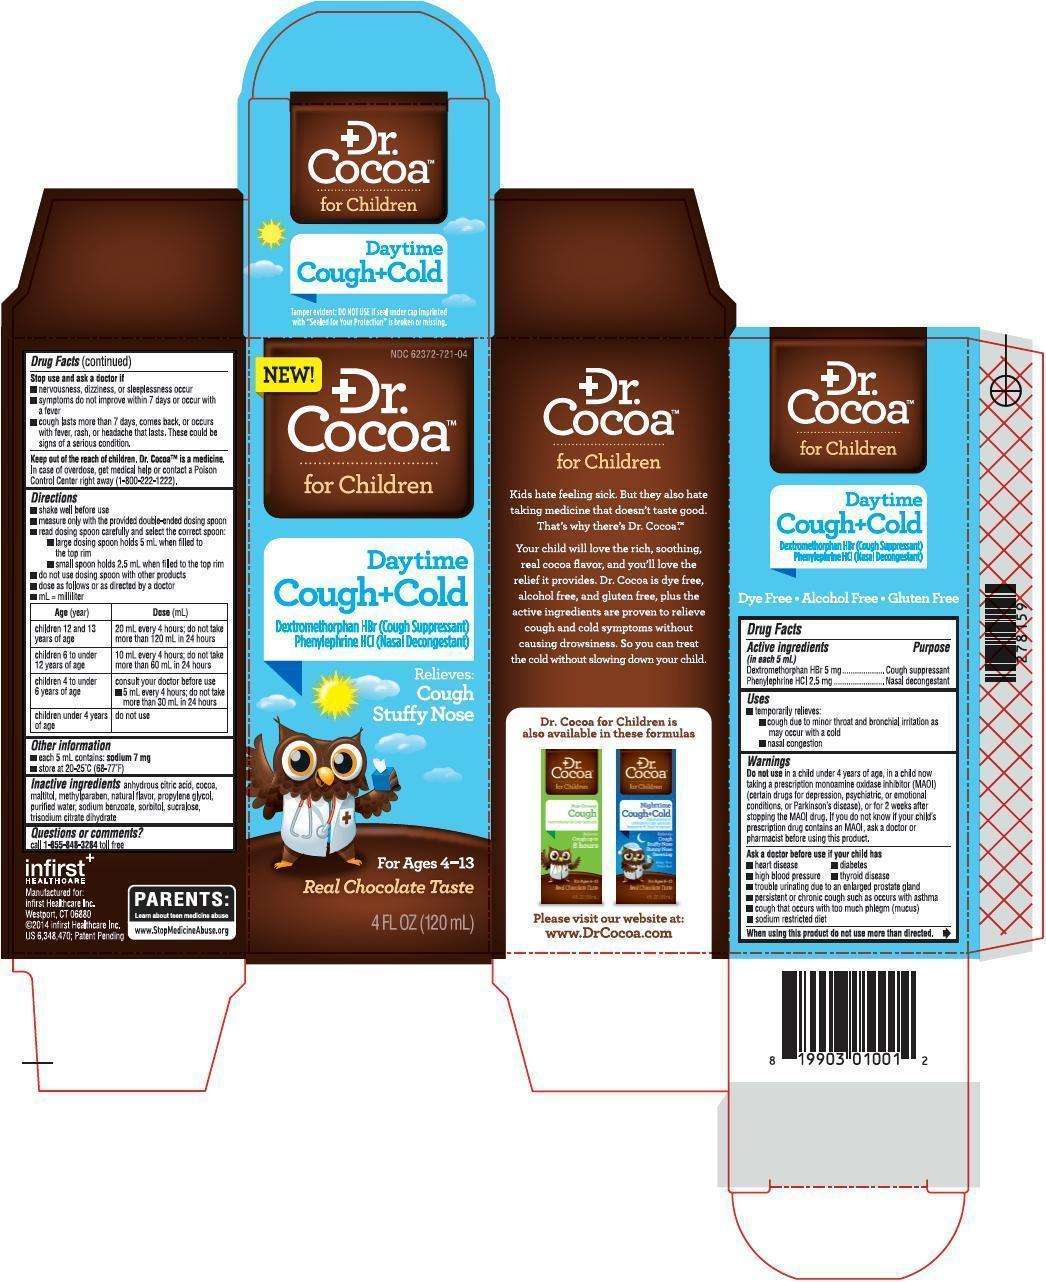 Dr. Cocoa Daytime Cough and Cold